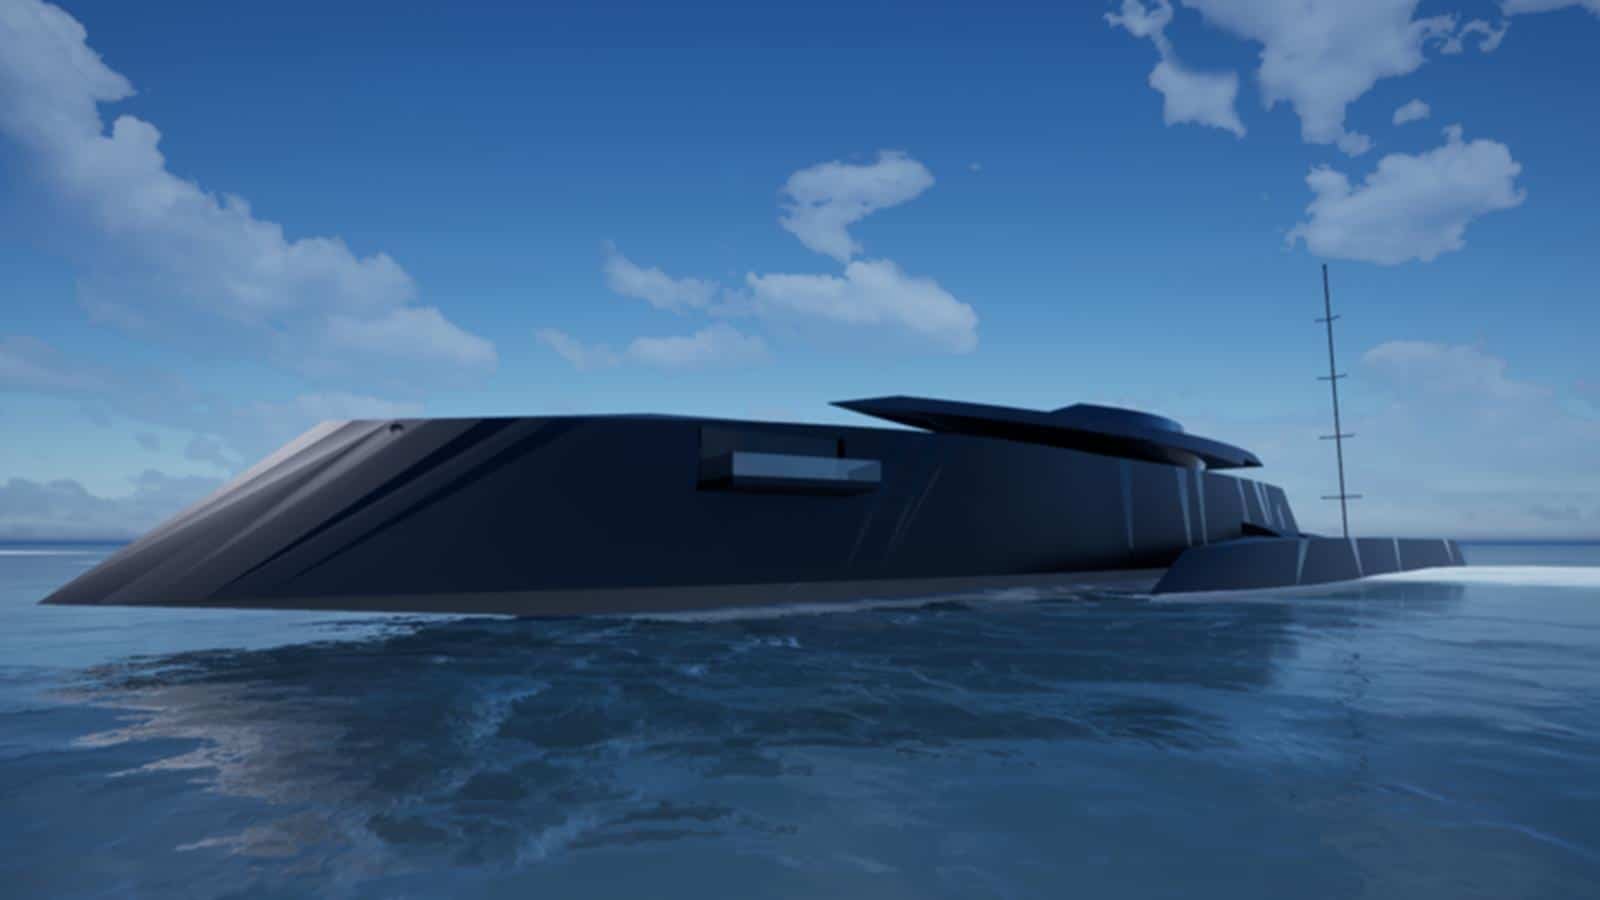 This is a luxury Bond Girl trimaran inspired by the companions of agent 007